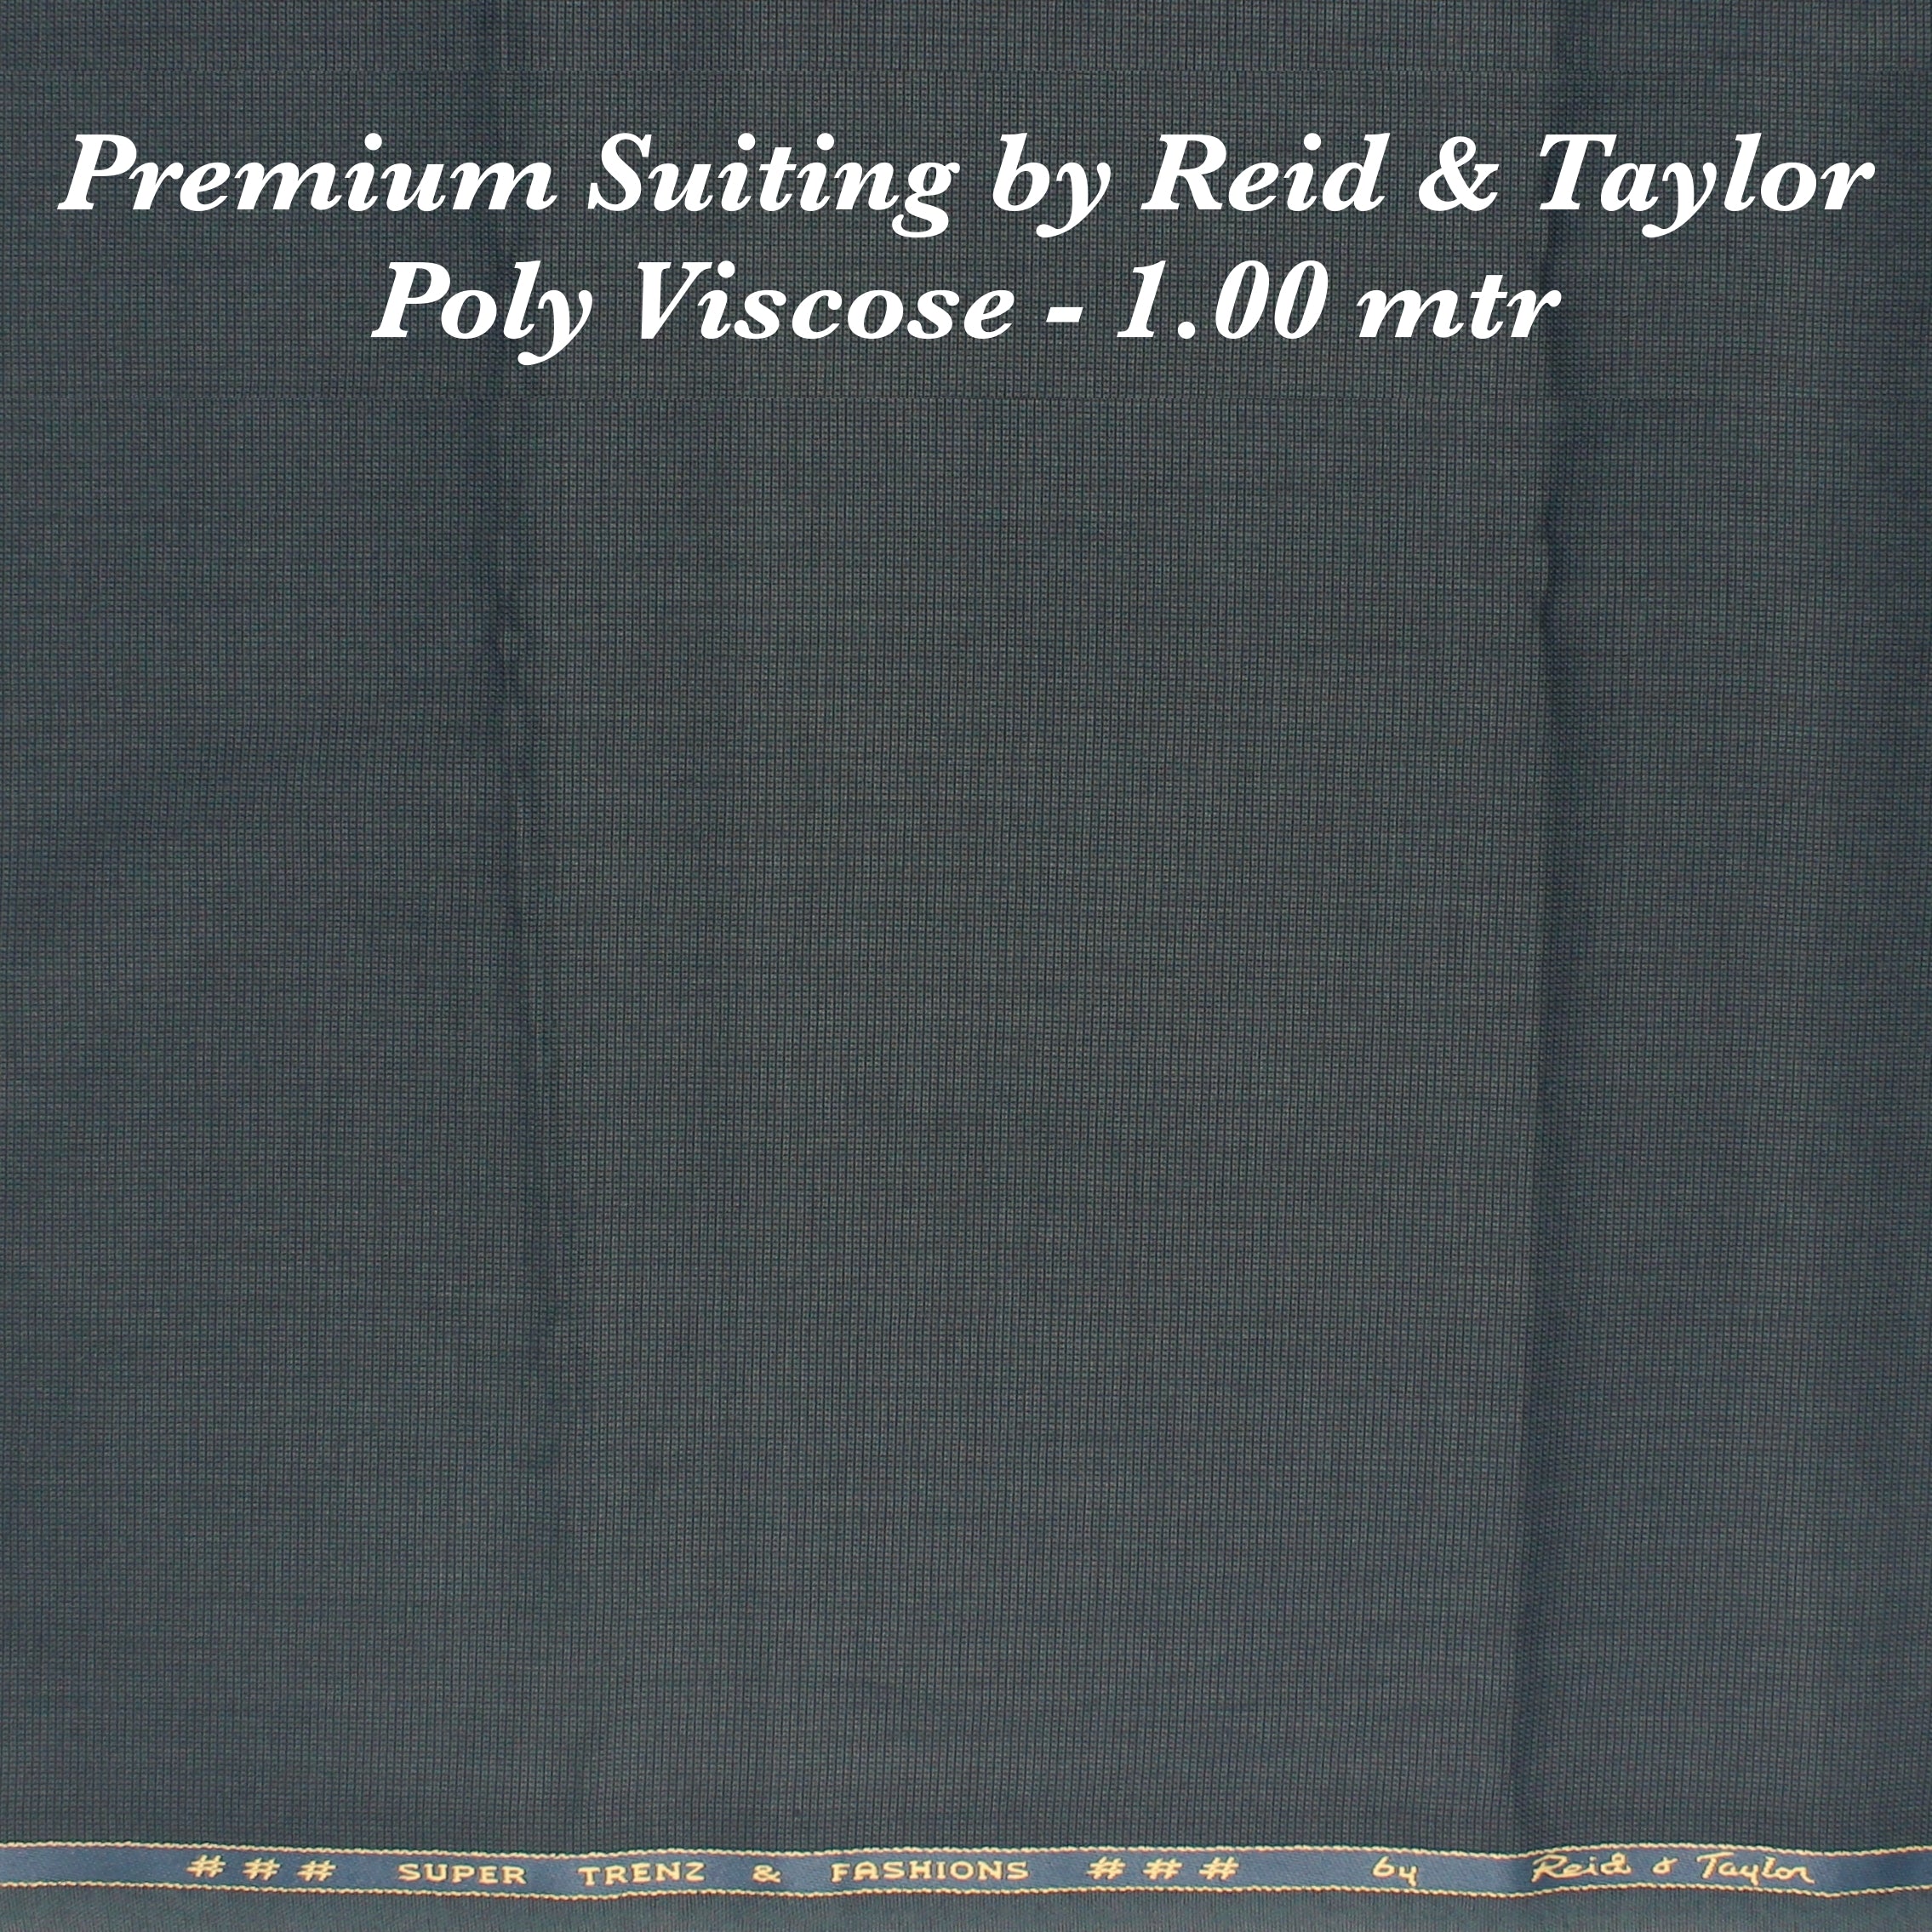 Reid & Taylor 100% SUPER 120's WOOL SUITING FABRIC = MADE IN SCOTLAND - 5.2  m. | eBay